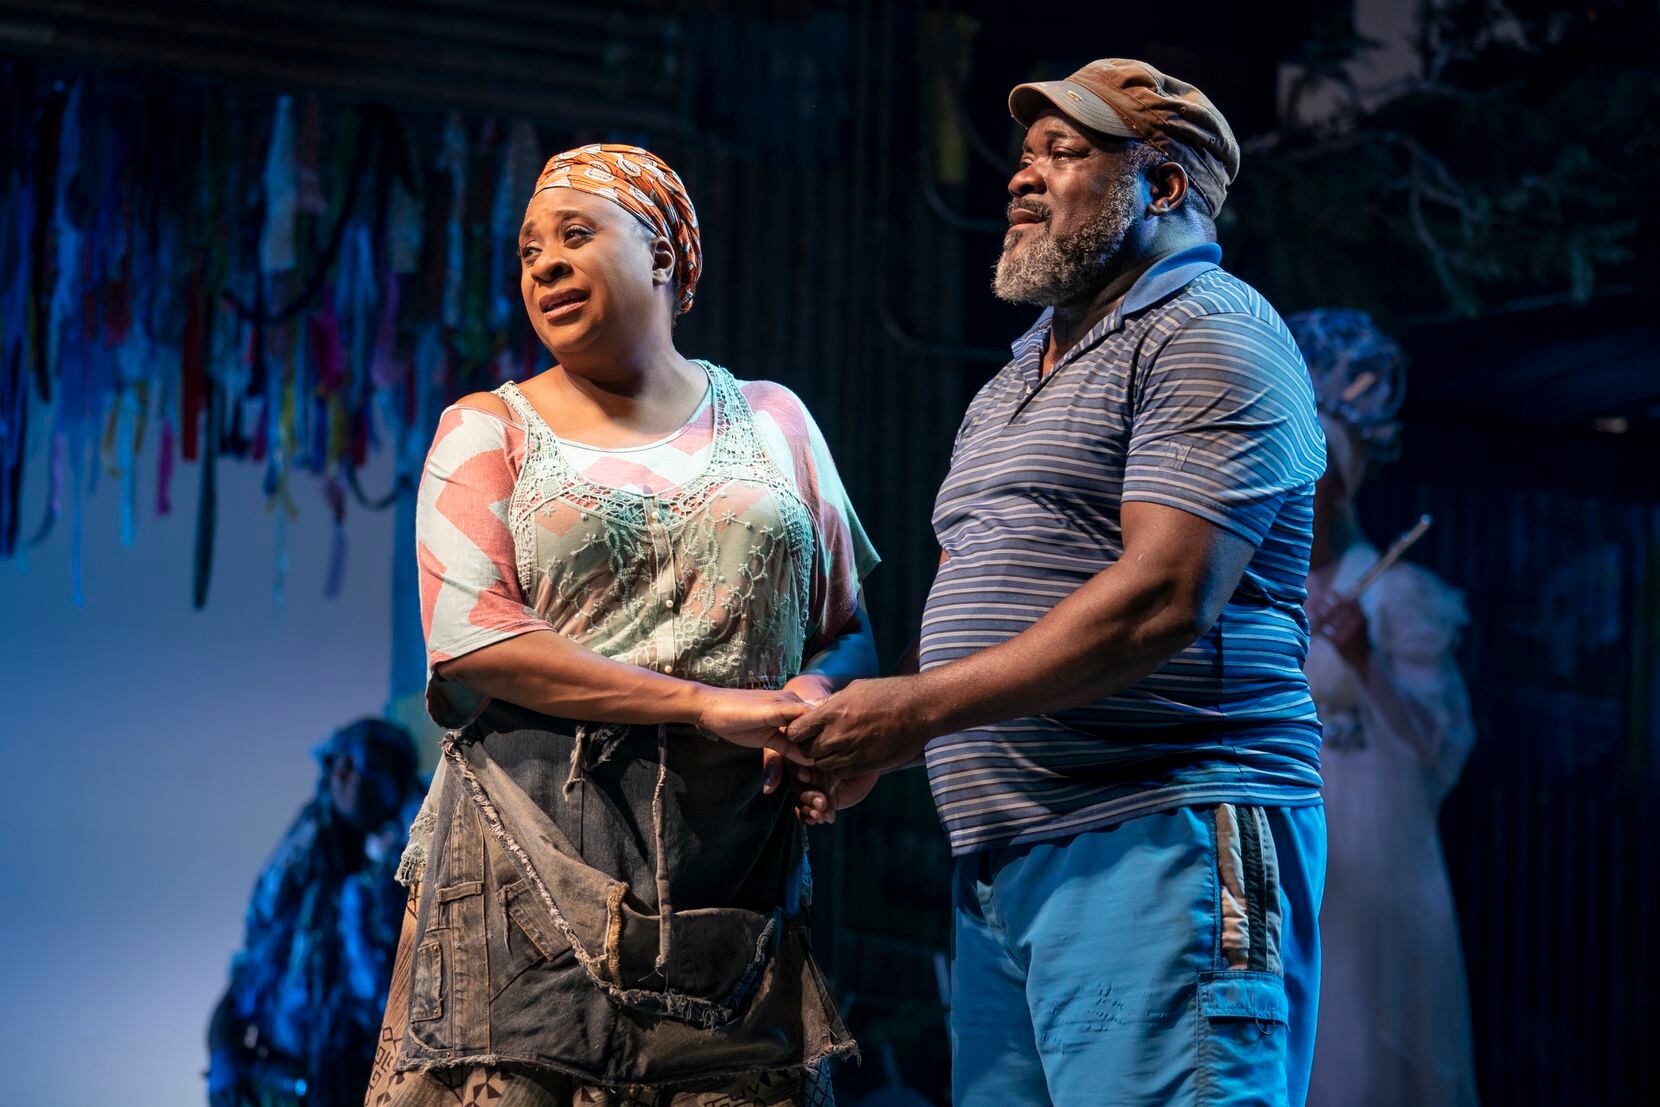 Danielle Lee Greaves as Mama Euralie and Phillip Boykin as Tonton Julian in the North American tour of "Once on This Island."